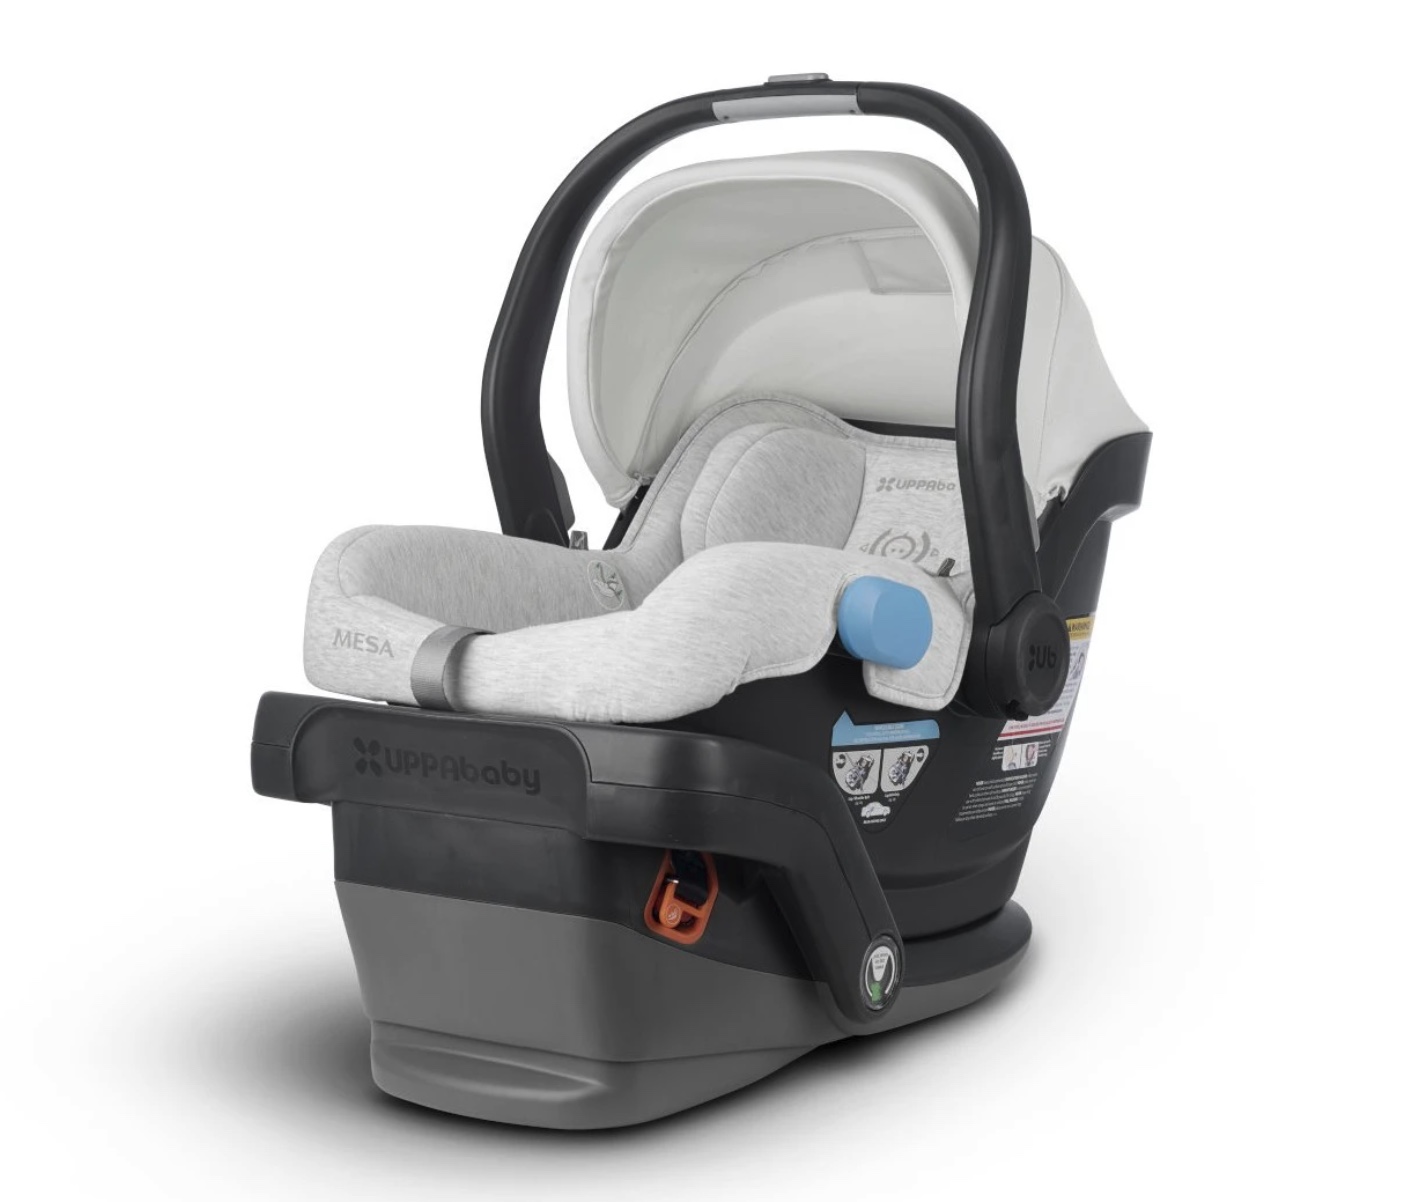 uppababy vista 2010 car seat compatibility